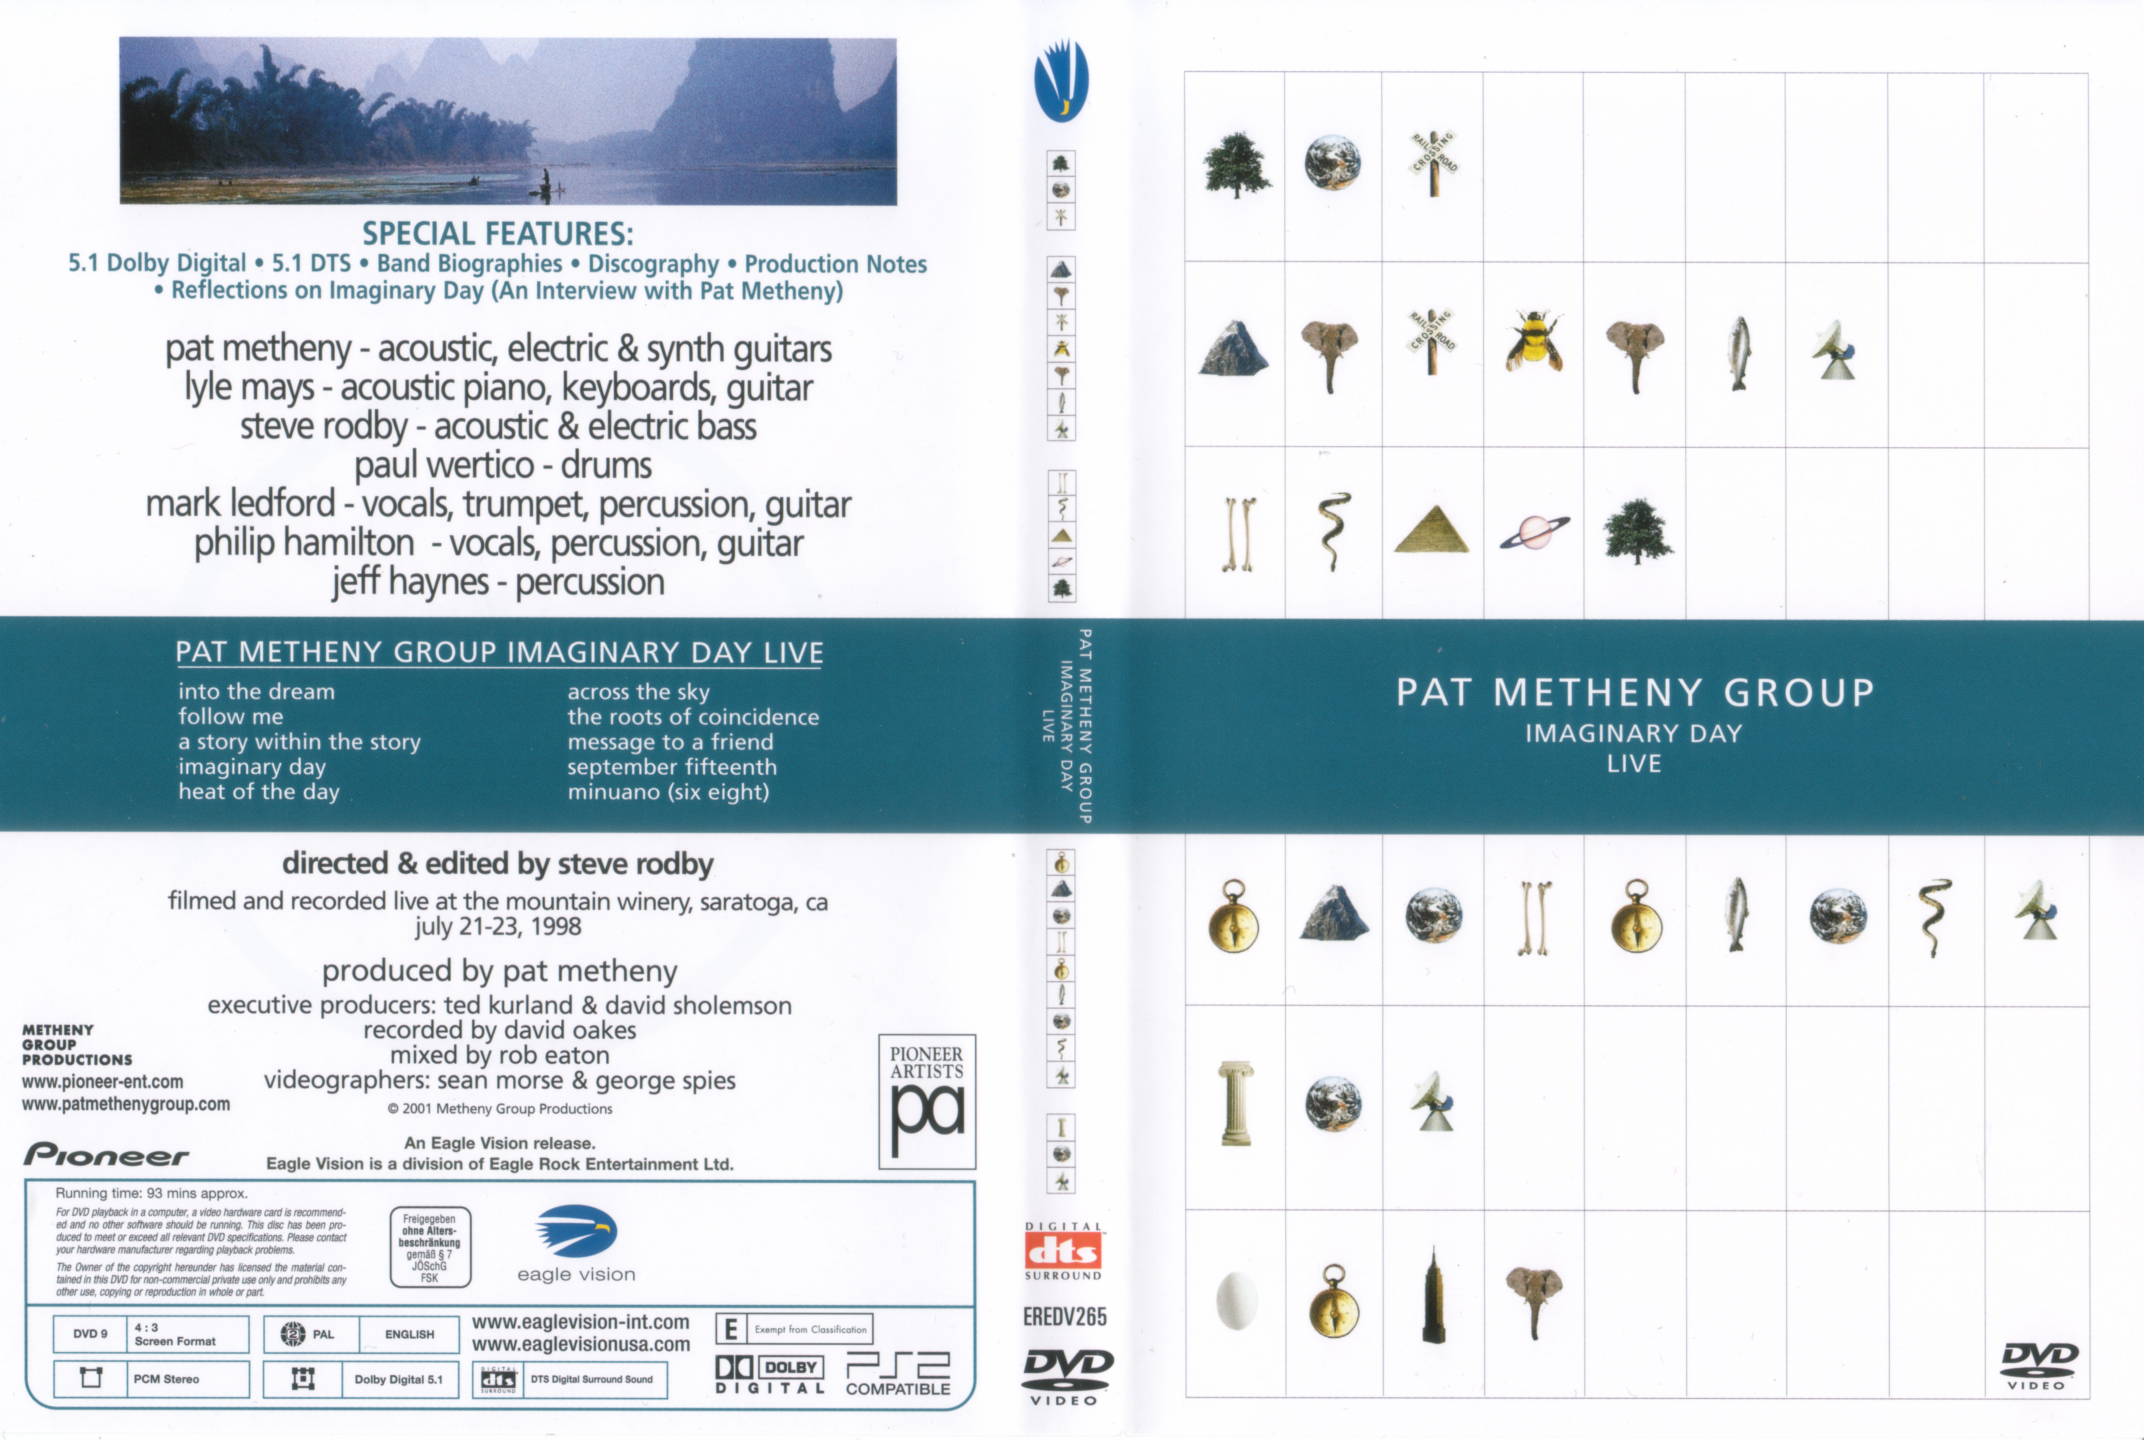 Jaquette DVD Pat Metheny Group - Imaginary day live